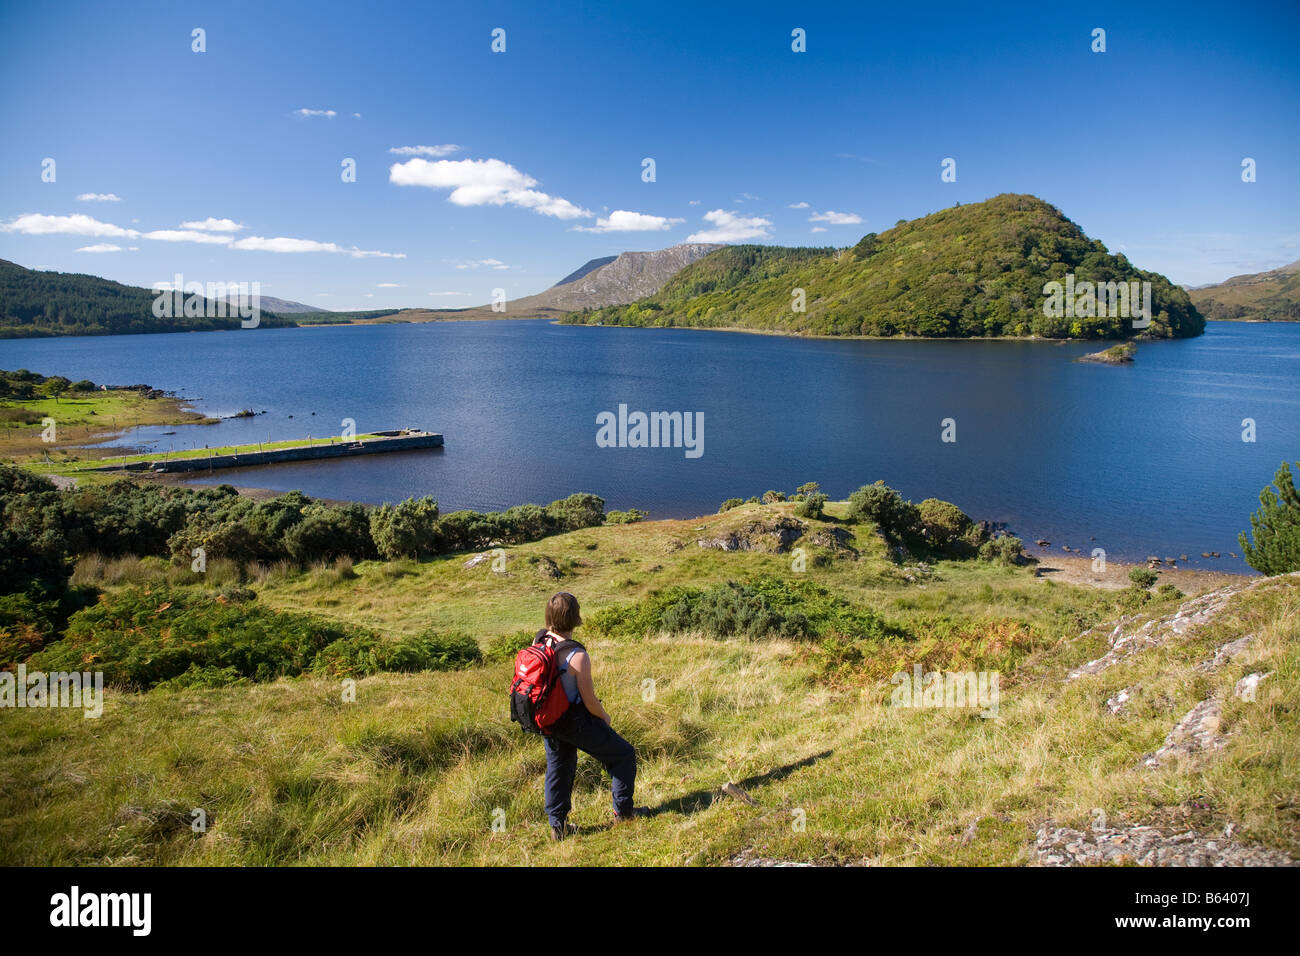 Walker looking over Lough Corrib and the Drumsnauv peninsula, County Galway, Ireland. Stock Photo